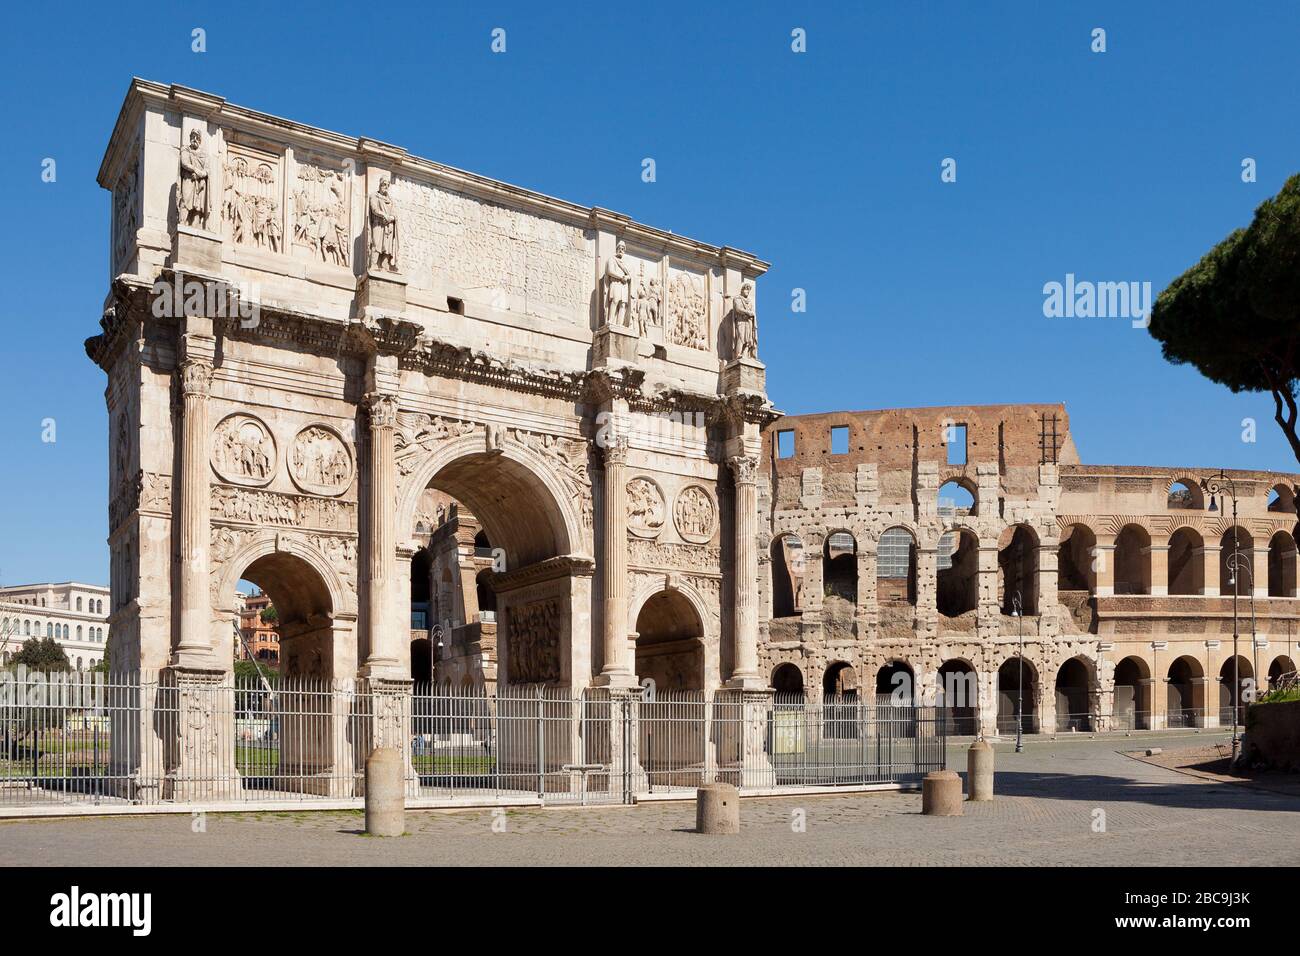 The Arch of Constantine (Arco di Costantino).  Triumphal arch and Colosseum on background. Rome, Italy Stock Photo